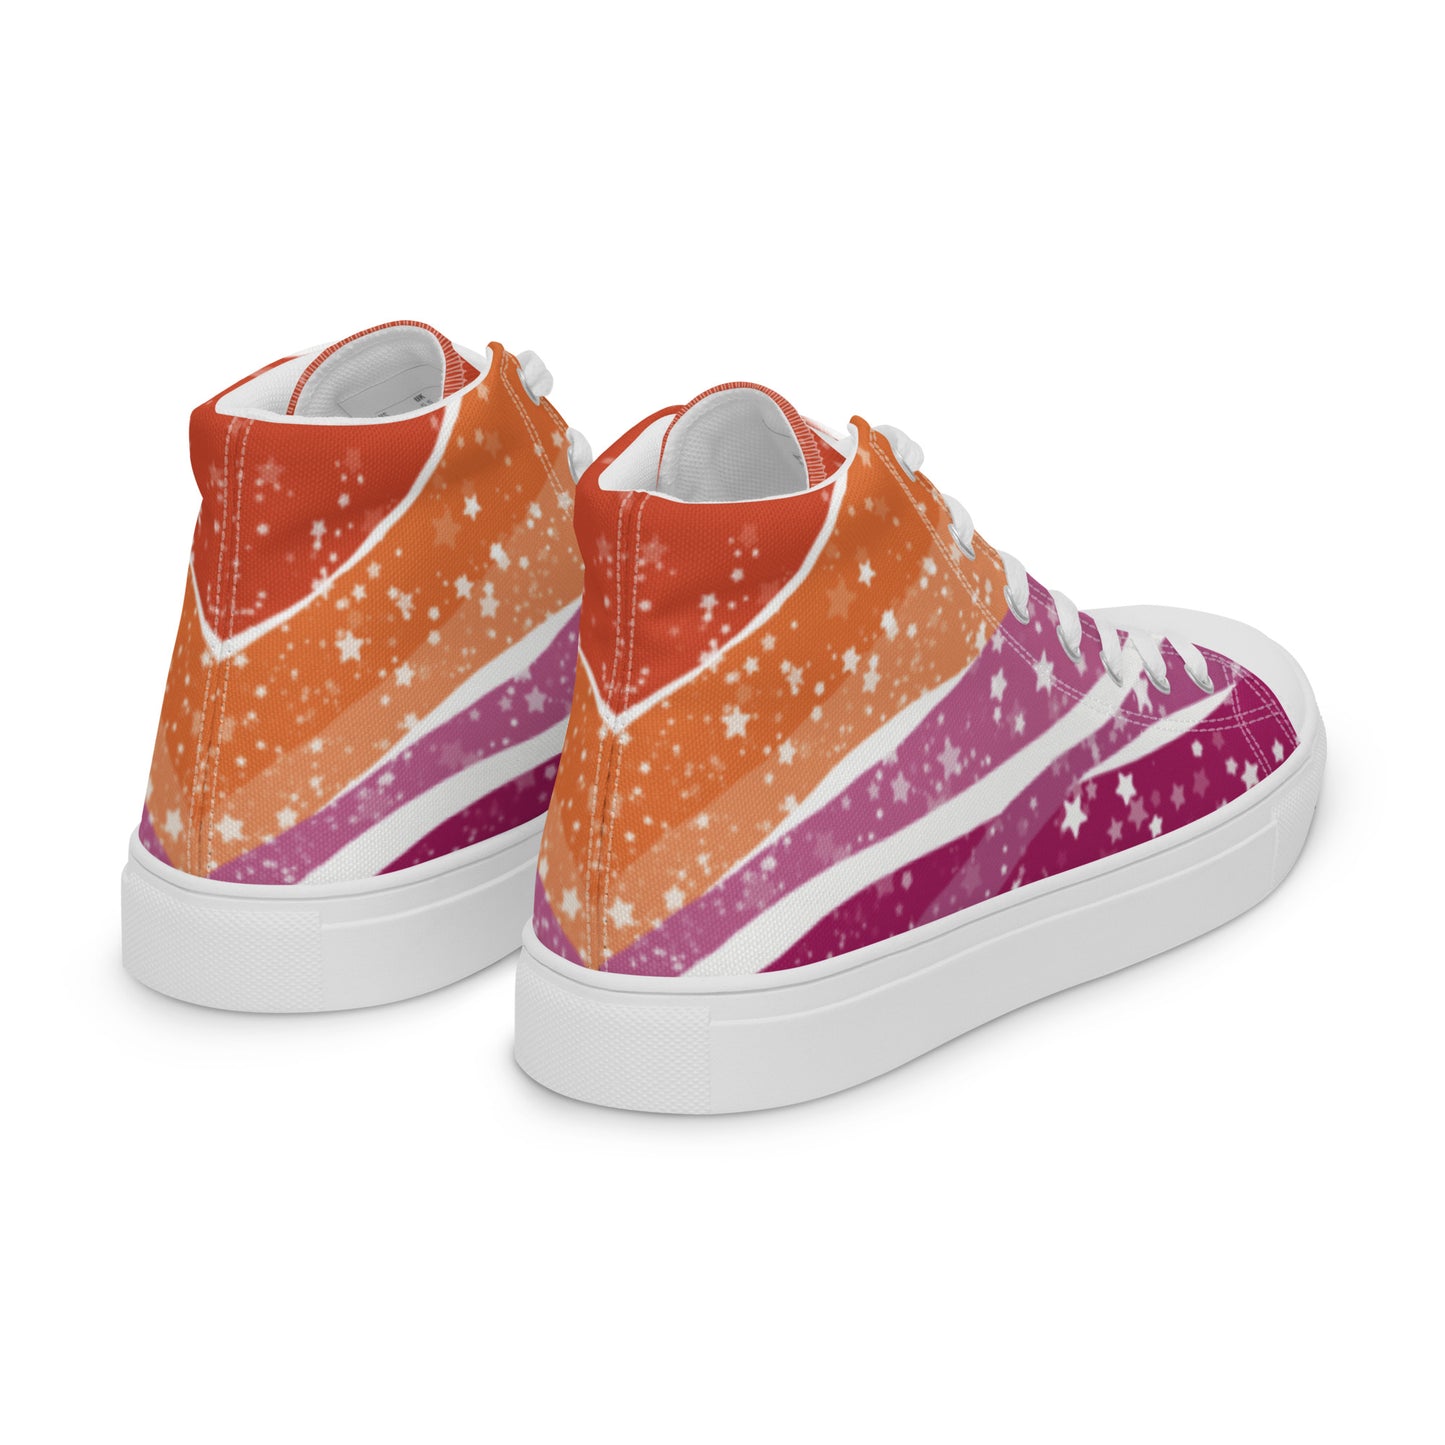 Right back view: A pair of high top shoes with ribbons of lesbian flag colors and stars coming from the heel and getting larger across the shoe to the laces.